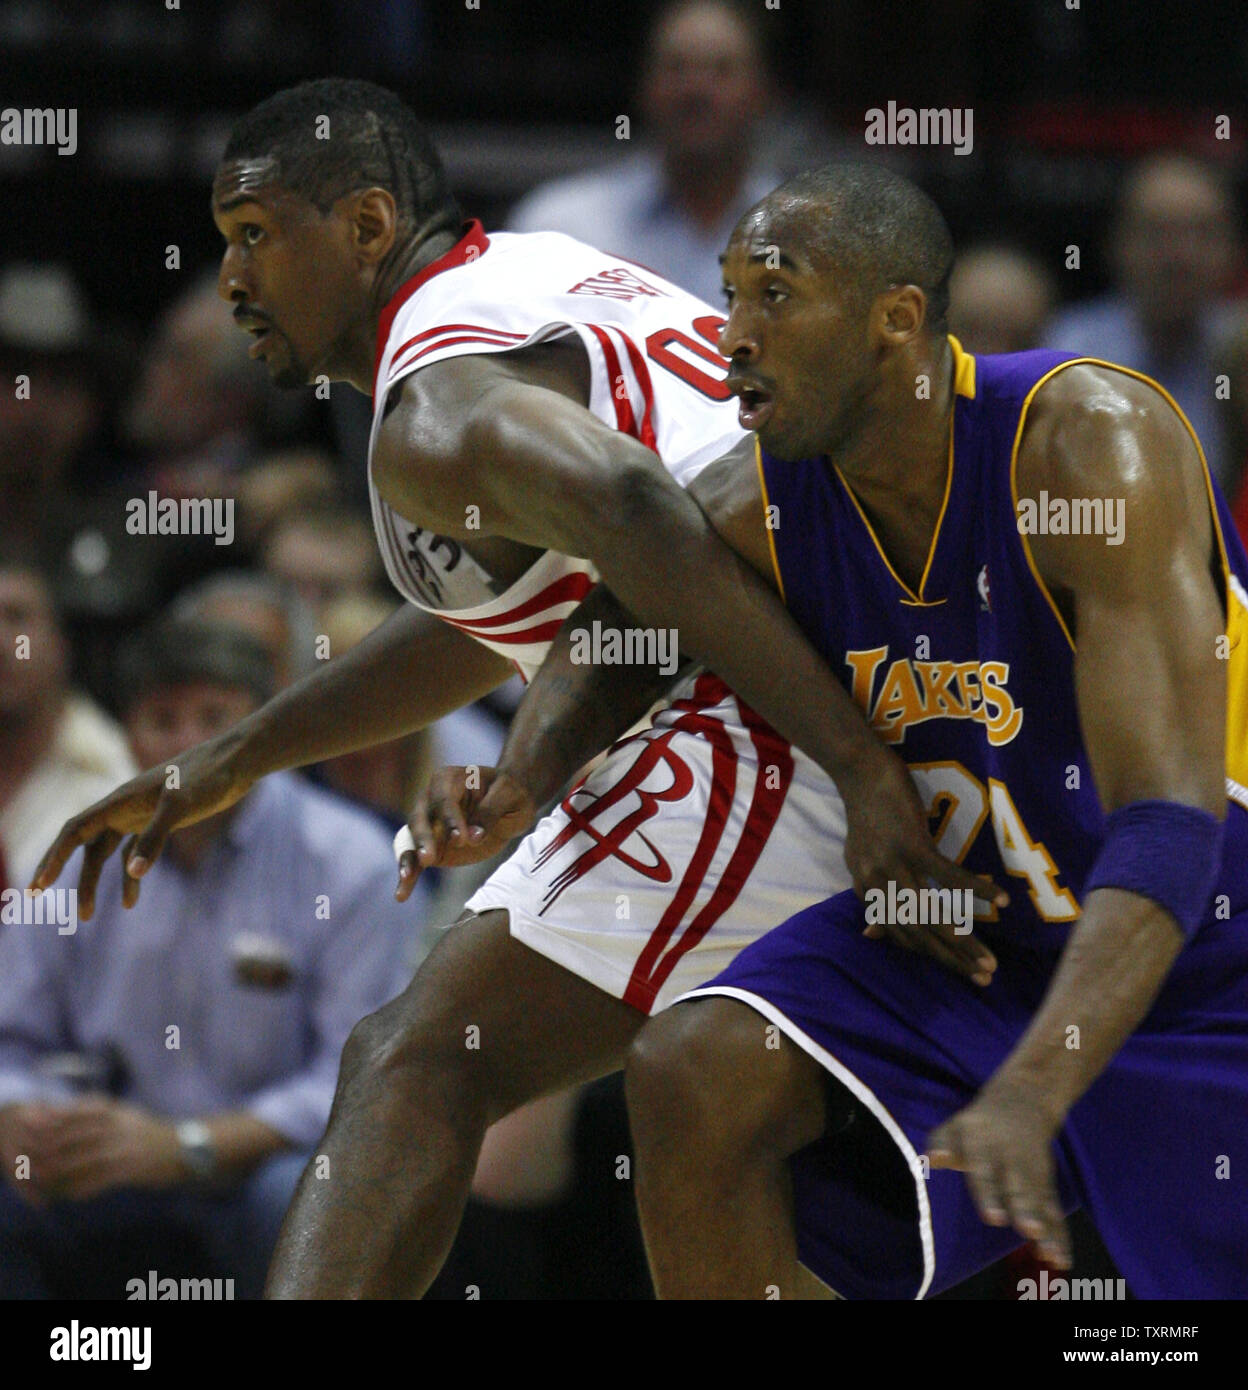 Houston Rockets guard Ron Artest  (L) tries to get away from the defense of Los Angeles Lakers guard Kobe Bryant in the second half of Game 3 of the Western Conference semifinals at Toyota Center in Houston, Texas on May 8, 2009. The Lakers defeated the Rockets 108-94 to take a 2-1 lead in their best-of-seven series. (UPI Photo/Aaron M. Sprecher) Stock Photo